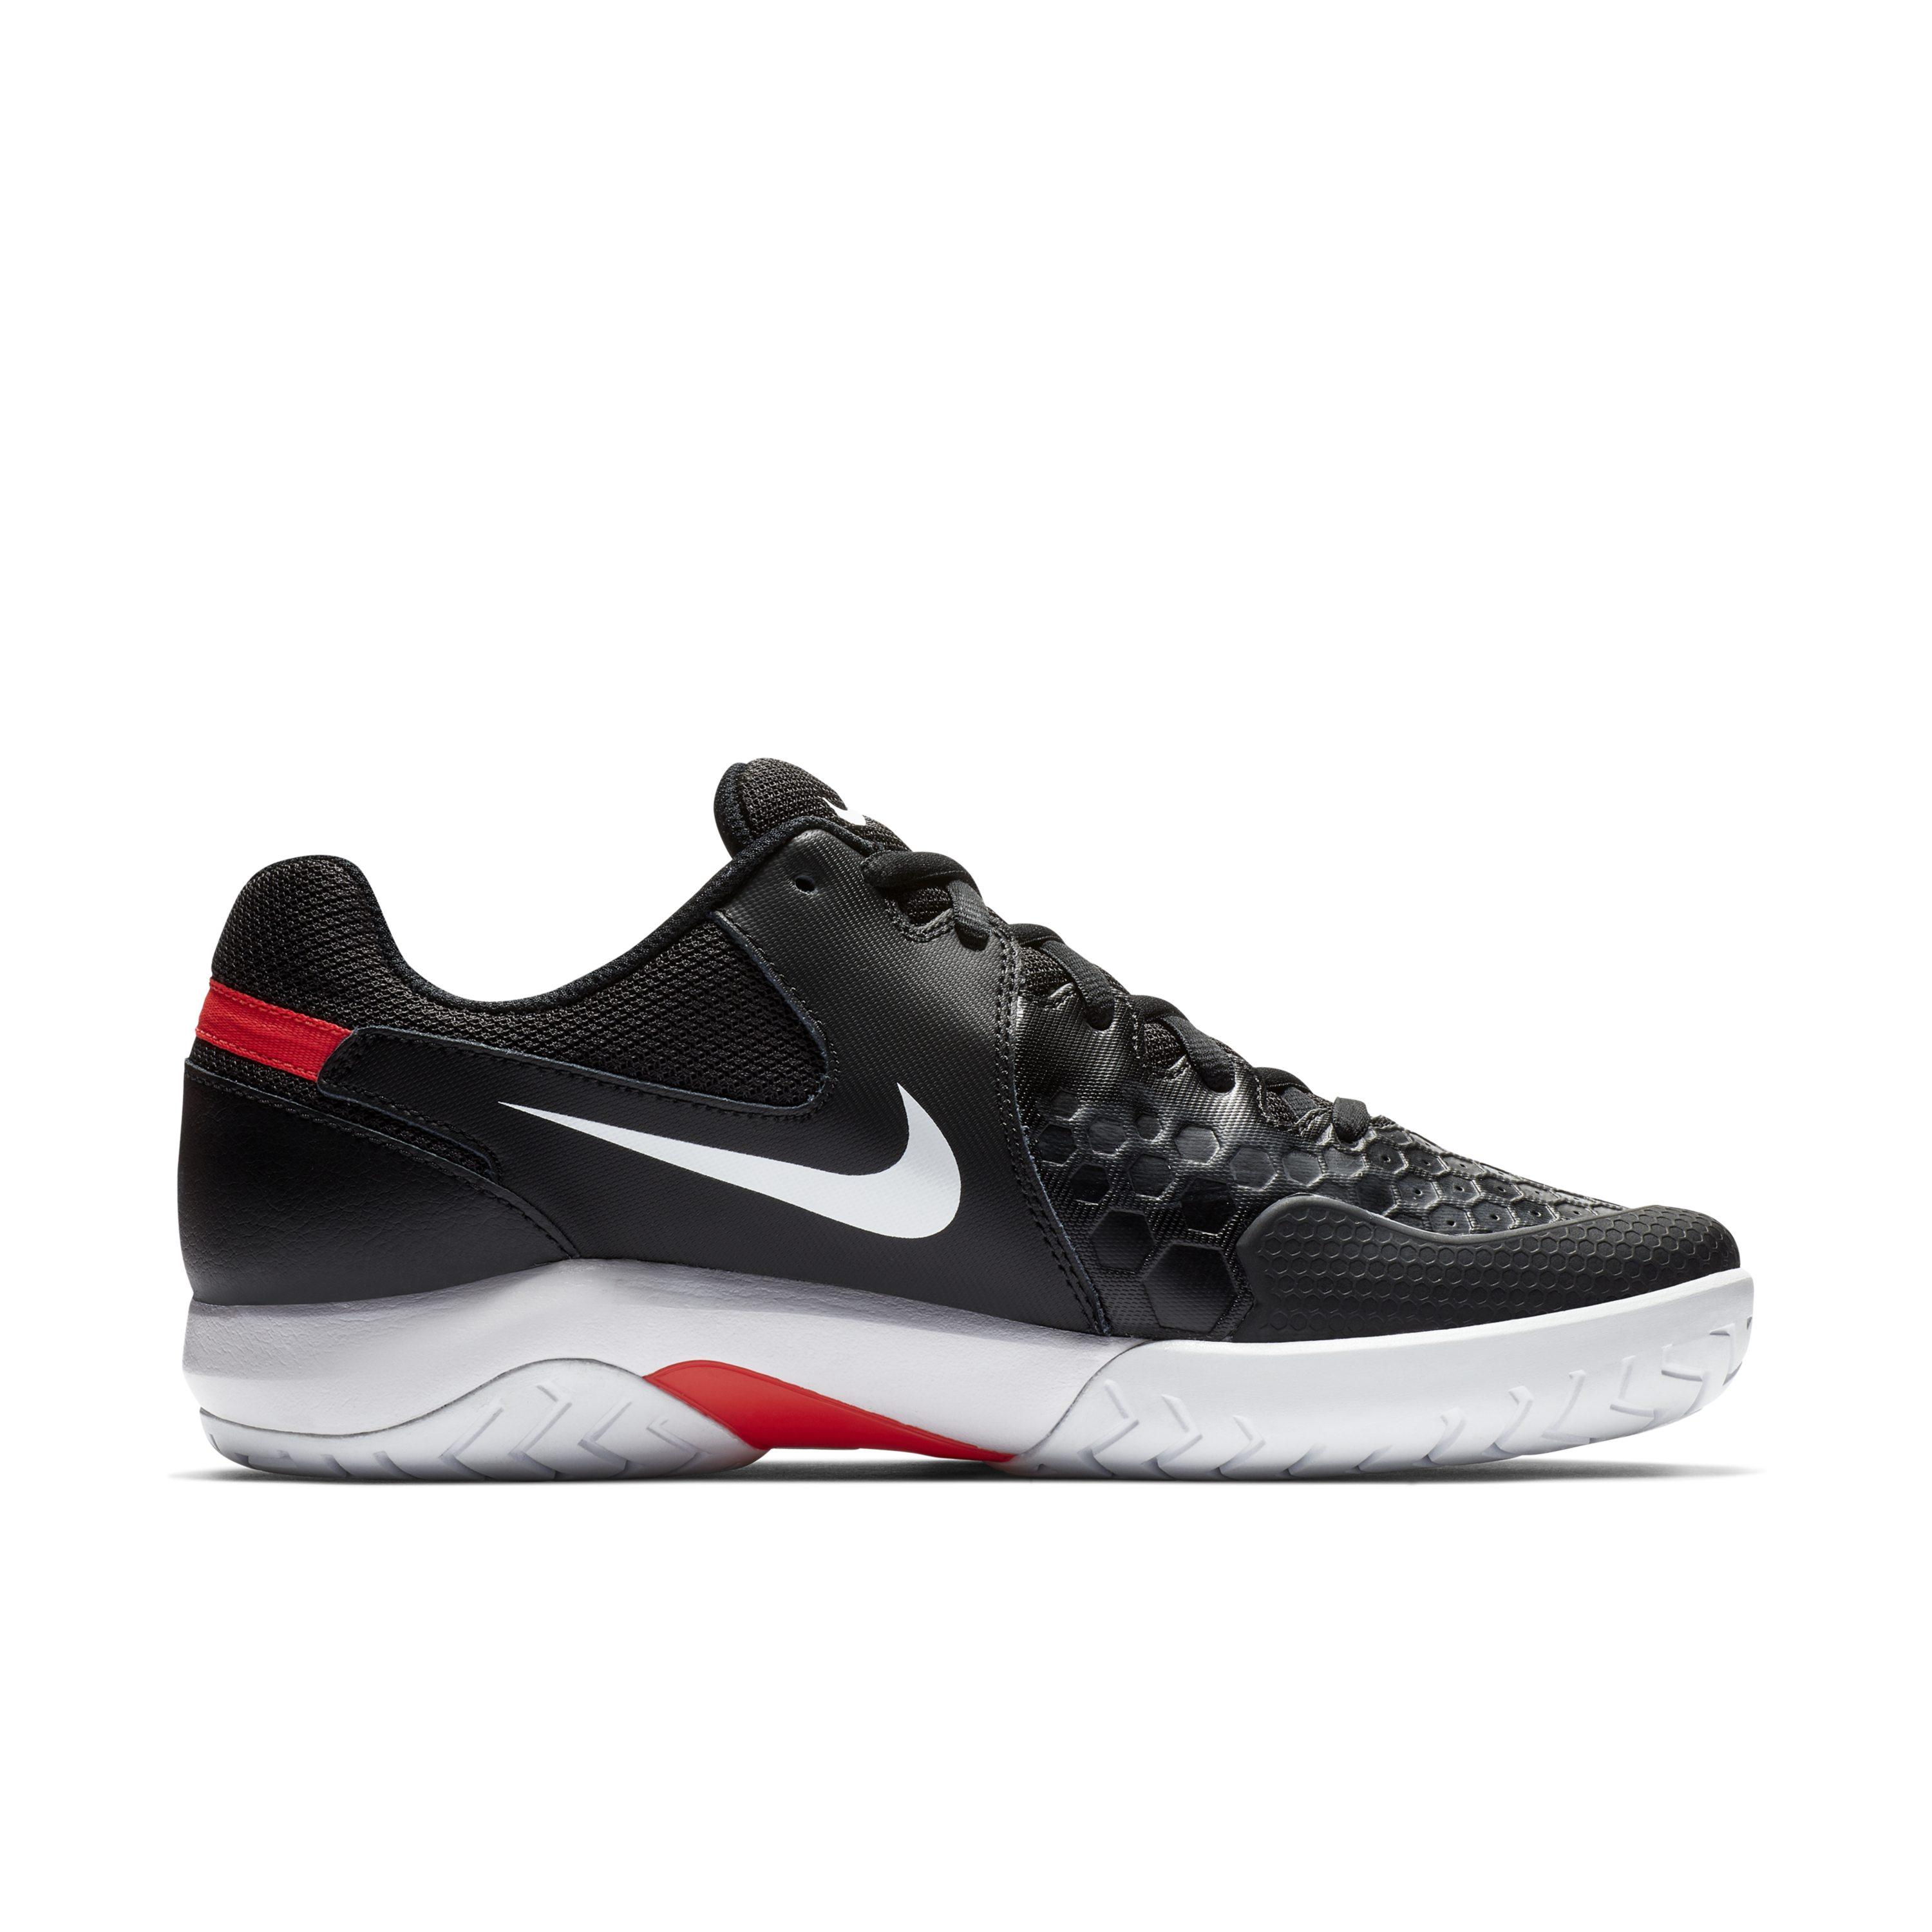 Nike Court Air Zoom Resistance Hard Court Tennis Shoe in Black for Men -  Lyst